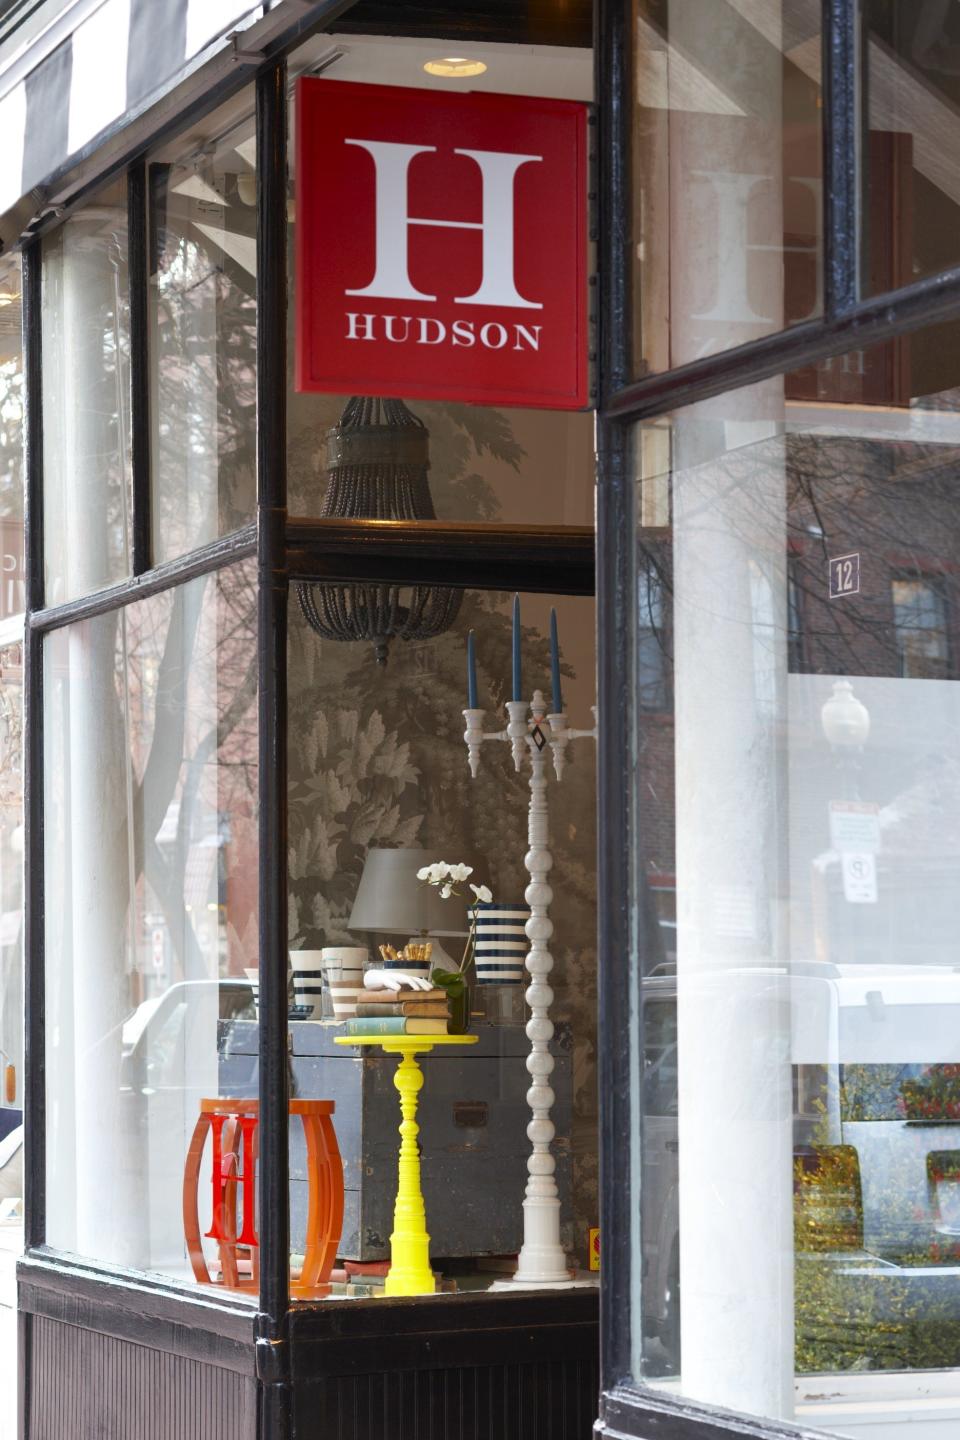 Jill Goldberg opened <a href="www.hudson-boston.com">HUDSON</a>, her home furnishings and decor destination on Shawmut Street in Boston's historic South End in September 2006 and it quickly became the area's premiere home boutique.  In September 2011, after five successful years, winning accolades and several "Best of" awards and garnering national media attention, Jill has moved around the corner to a larger location.  